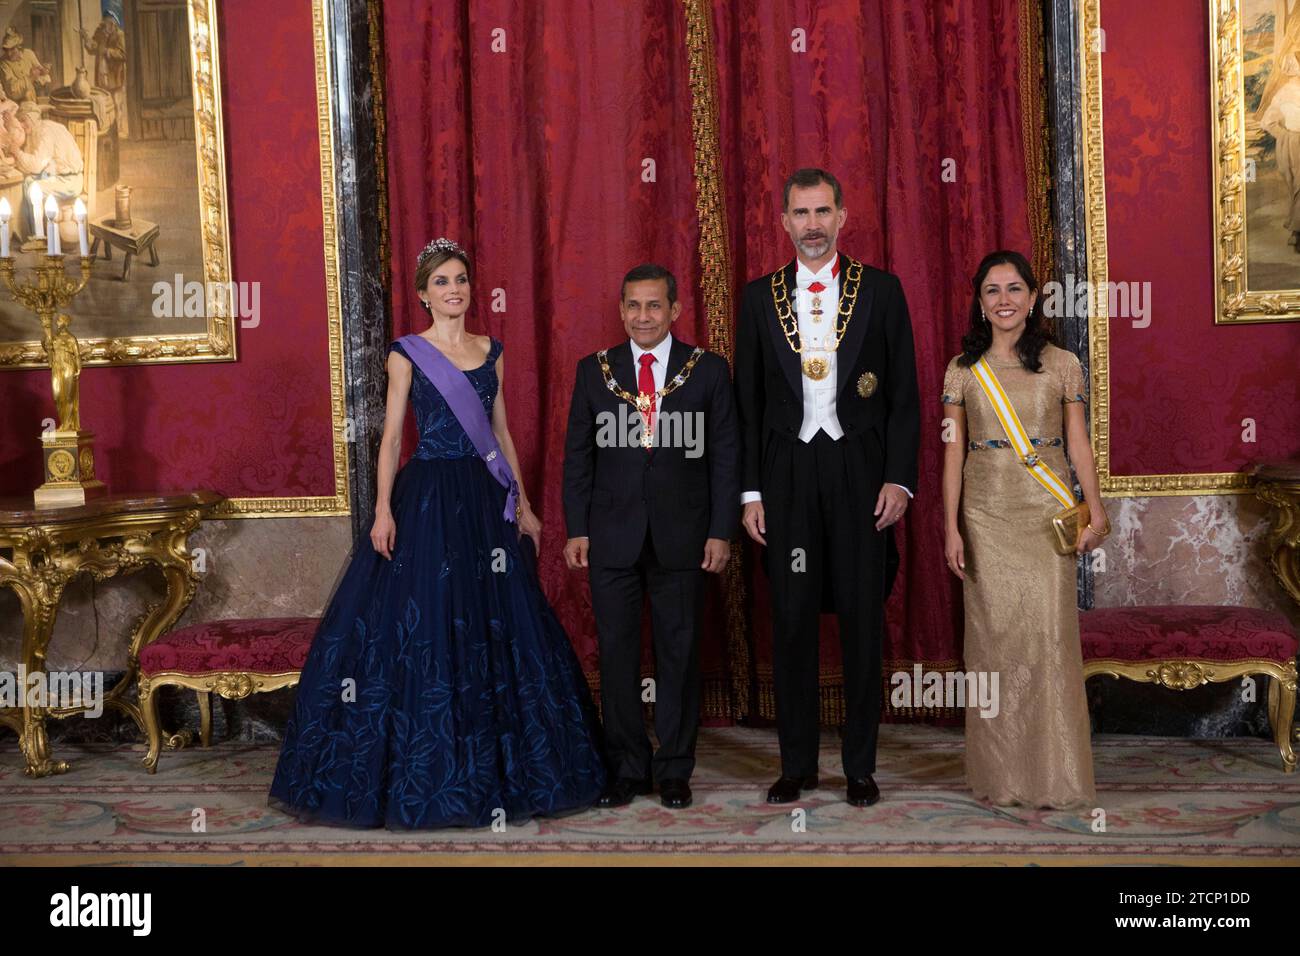 Madrid, 07/07/2015. King Felipe VI and Queen Letizia offer a gala dinner at the Royal Palace to the president of Peru Ollanta Humala and his wife Nadine Heredia. Photo: Ángel de Antonio ARCHDC. Credit: Album / Archivo ABC / Ángel de Antonio Stock Photo